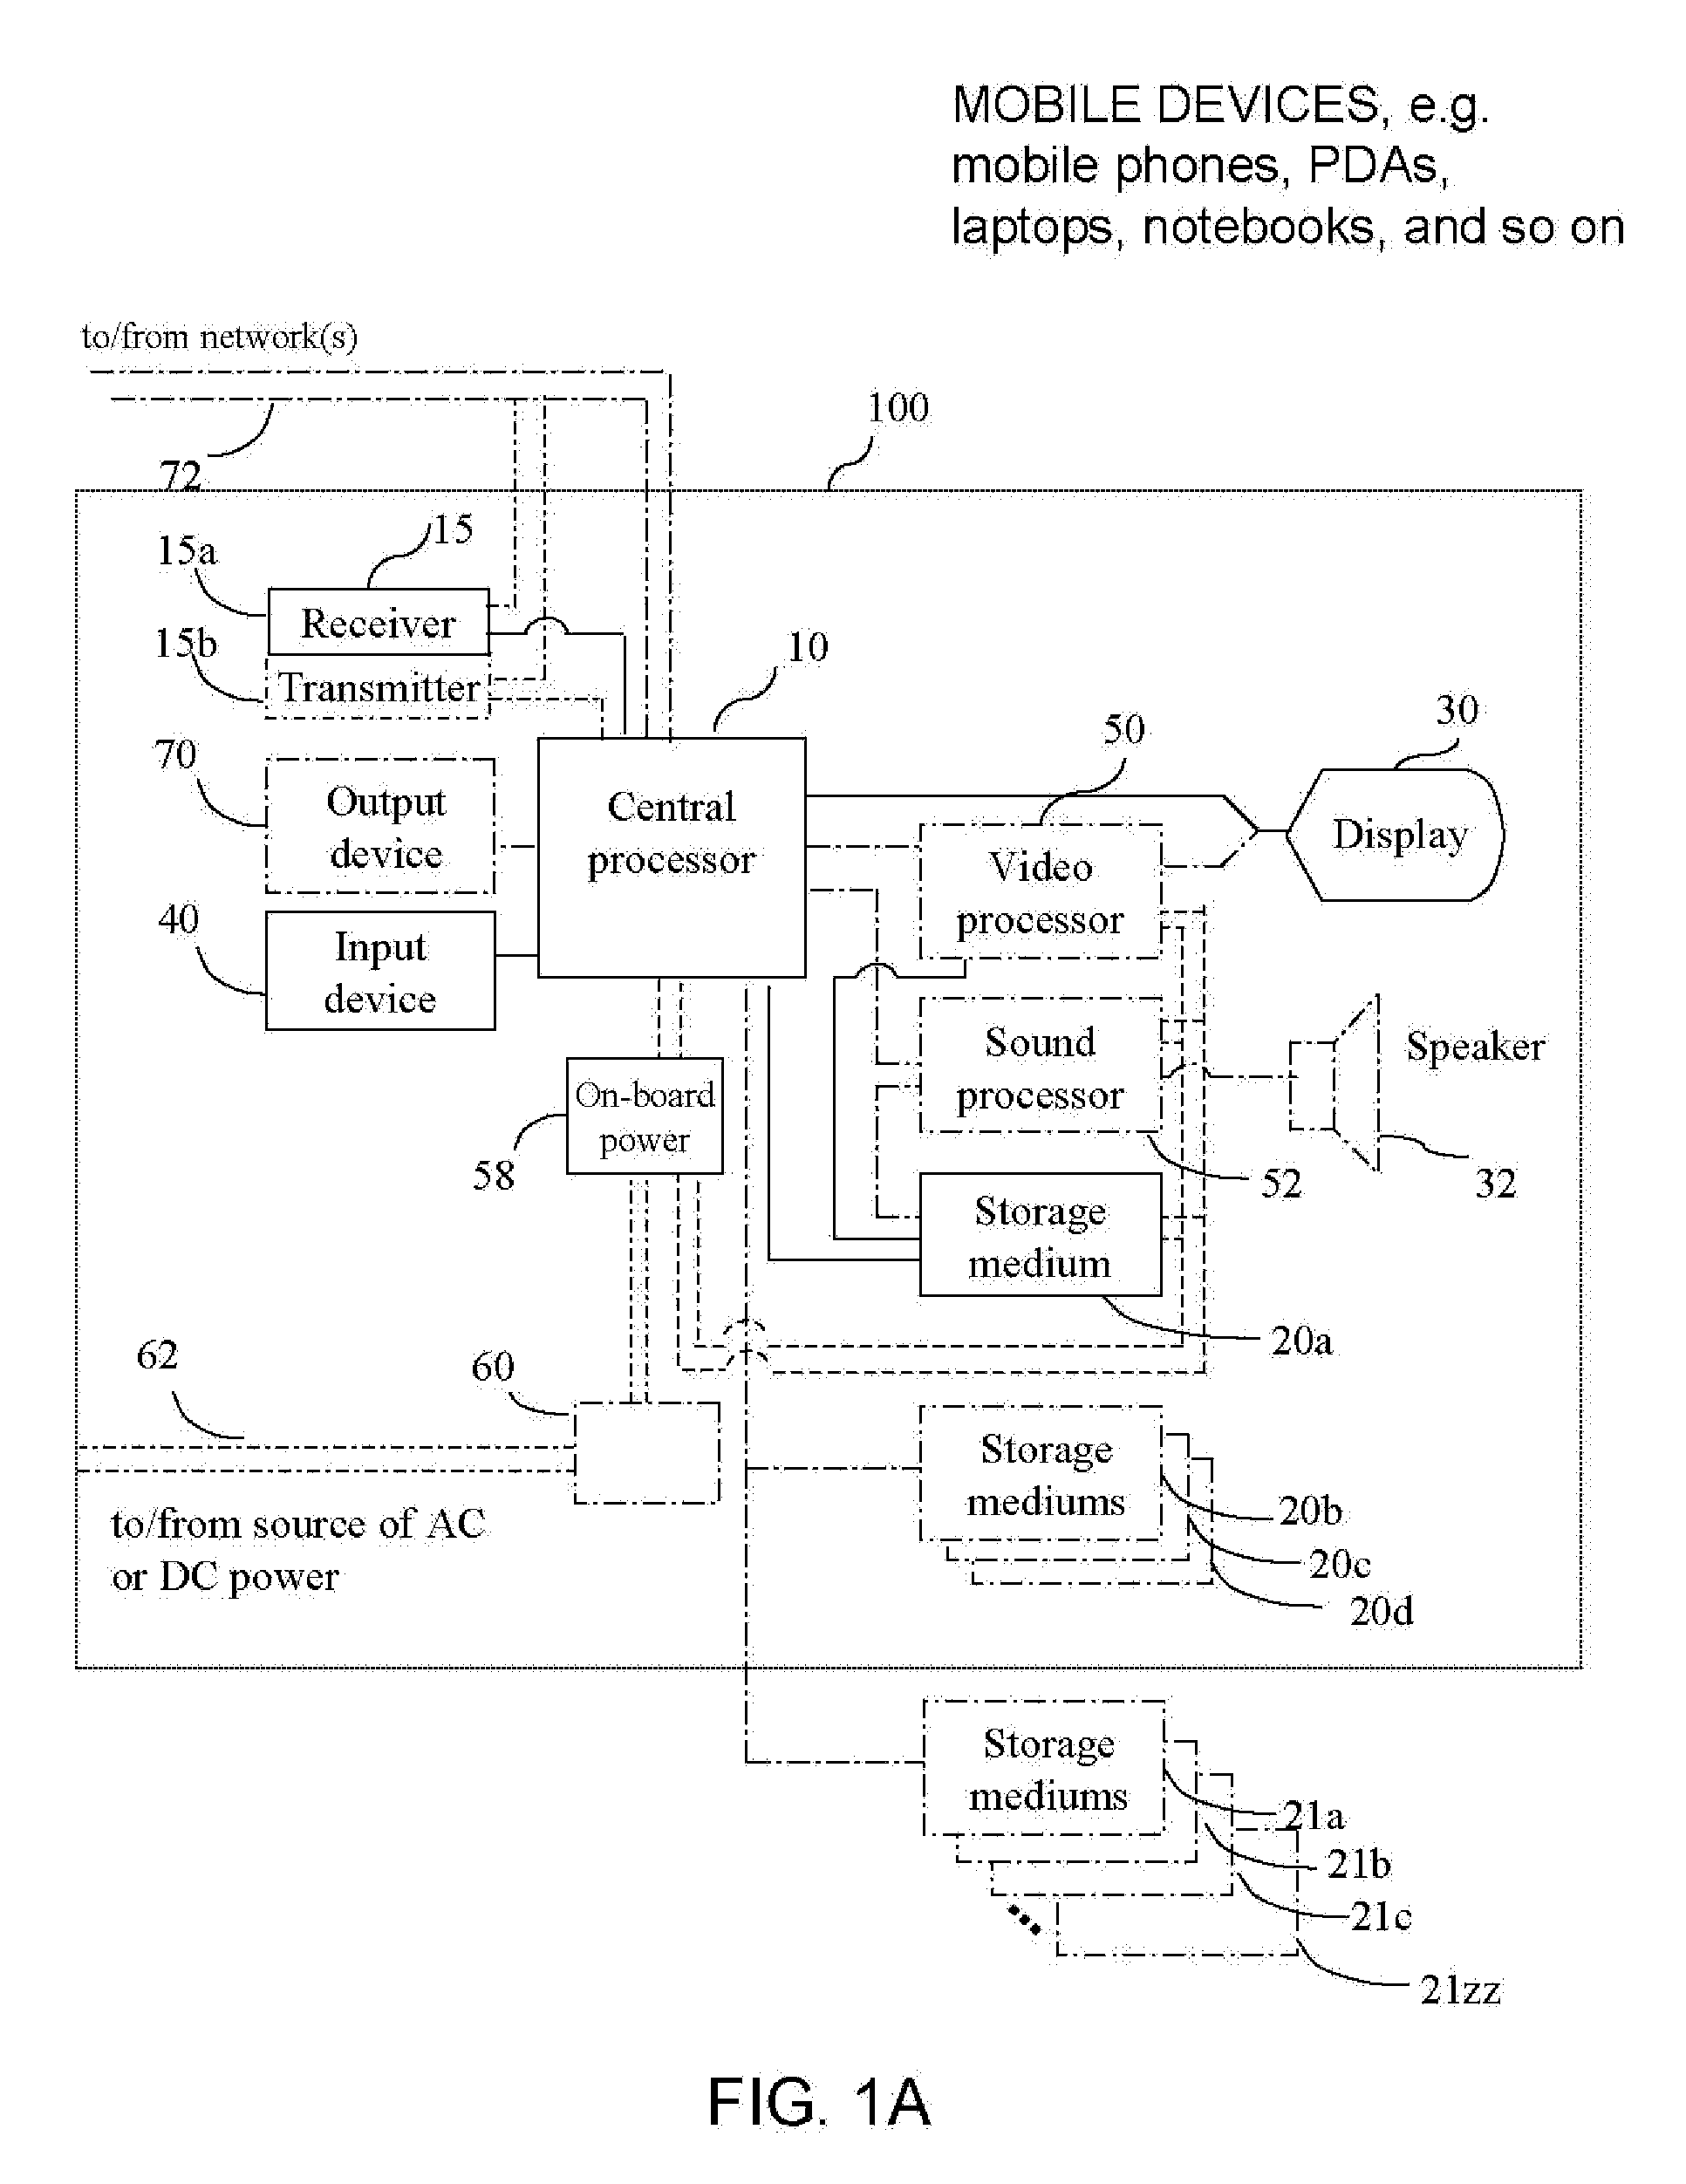 Distribution of Targeted Messages and the Serving, Collecting, Managing, and Analyzing and Reporting of Information relating to Mobile and other Electronic Devices